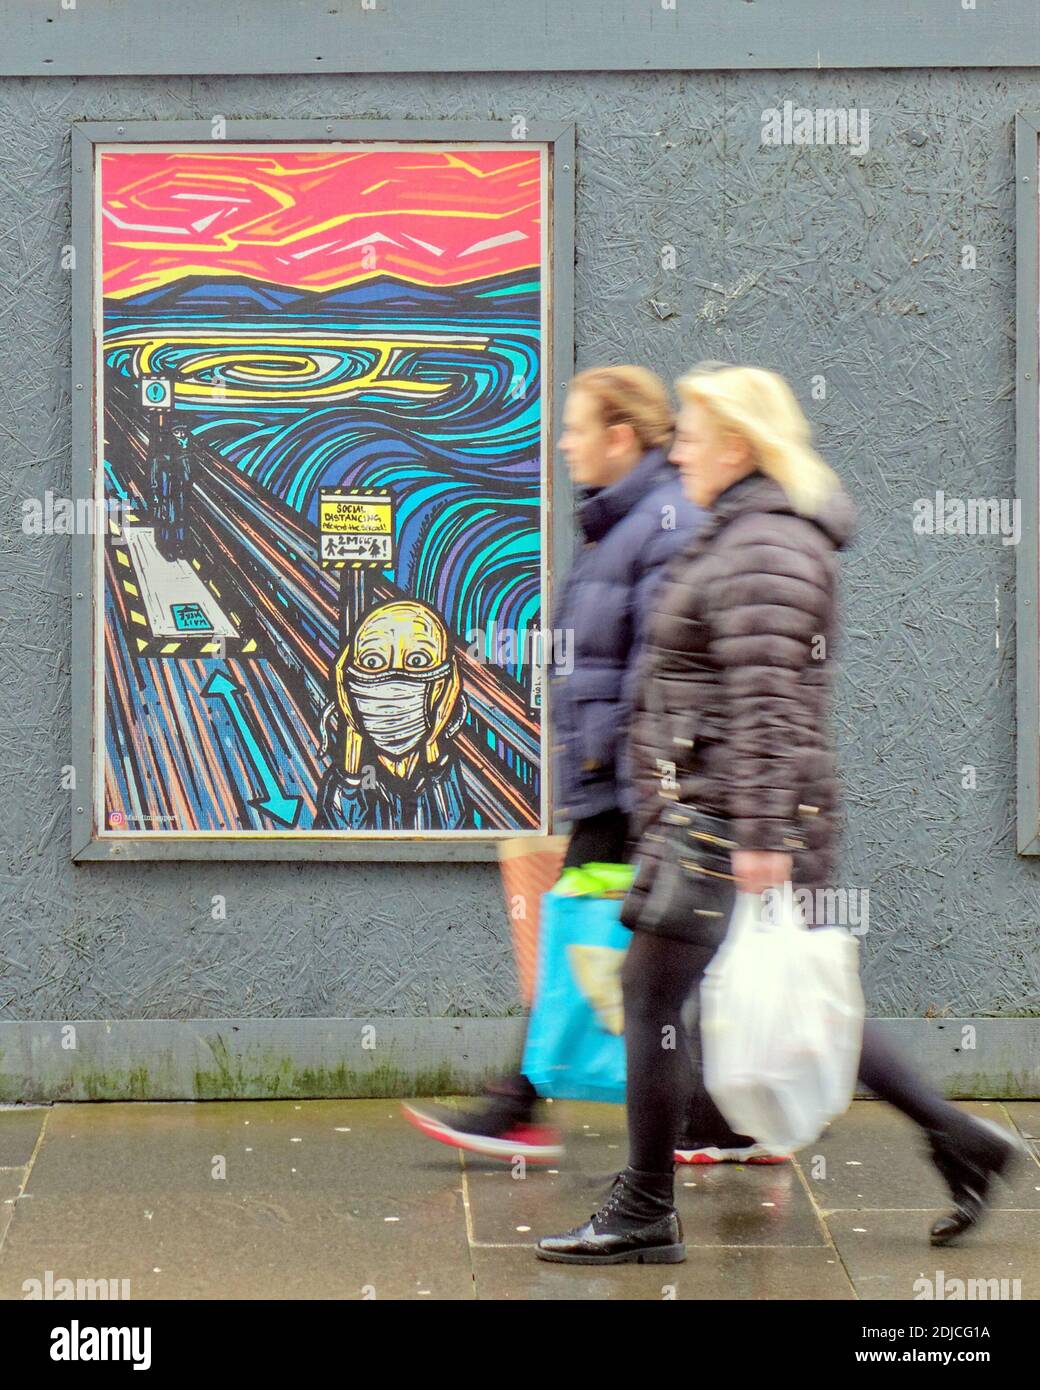 Glasgow, Scotland, UK, 14th December, 2020: Not like Christmas in the city as dour weather and covid combine to lower the spirit and destroy the soul of the town. The new munsch street artwork tribute patronises social distancing and finds an audience amongst locals in the merchant city area.. Credit: Gerard Ferry/Alamy Live News Stock Photo